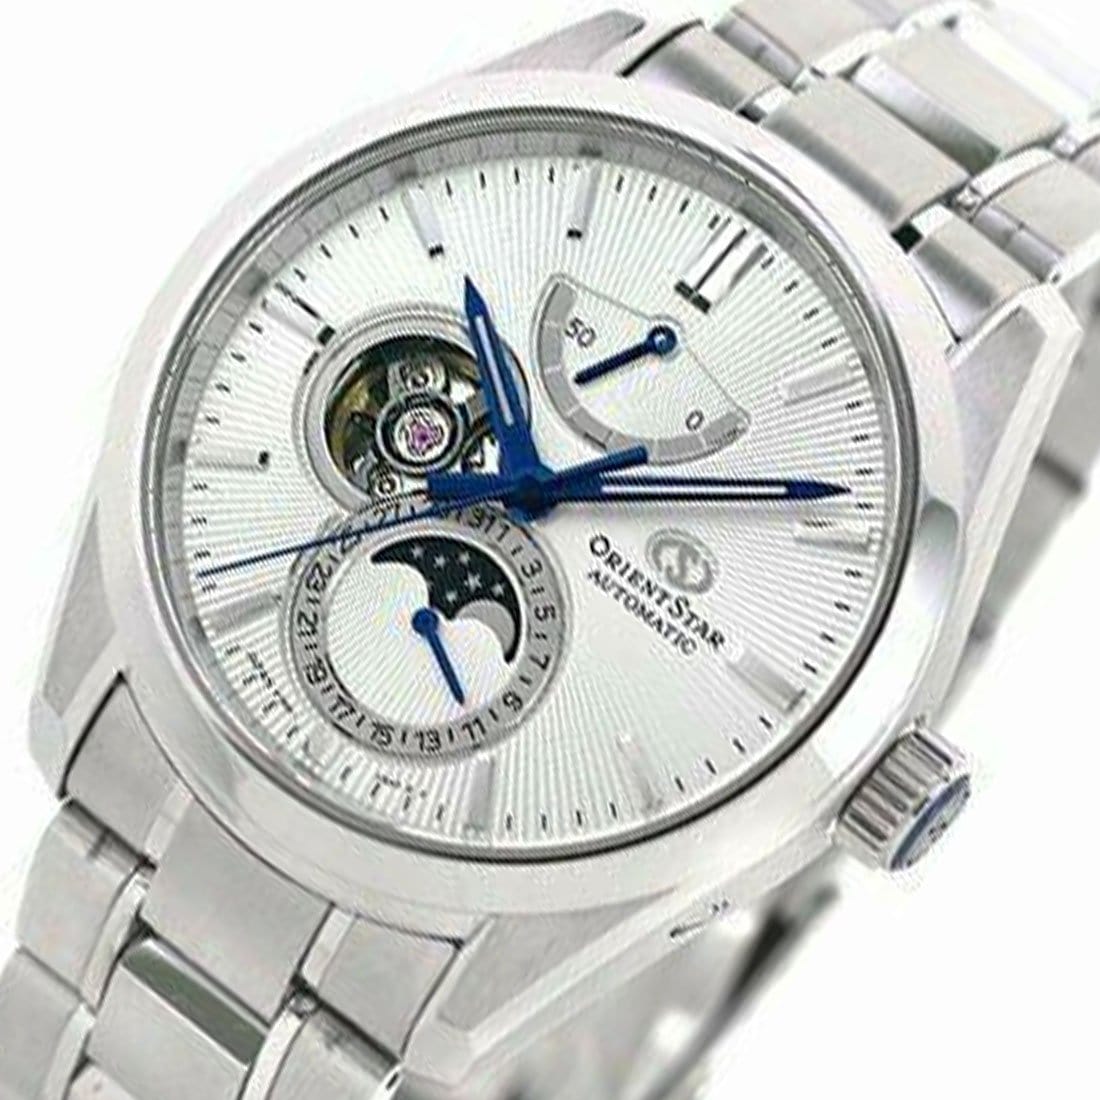 RE-AY0002S00B RE-AY0002S Orient Star Moon Phase Classic Automatic Open Heart Watch